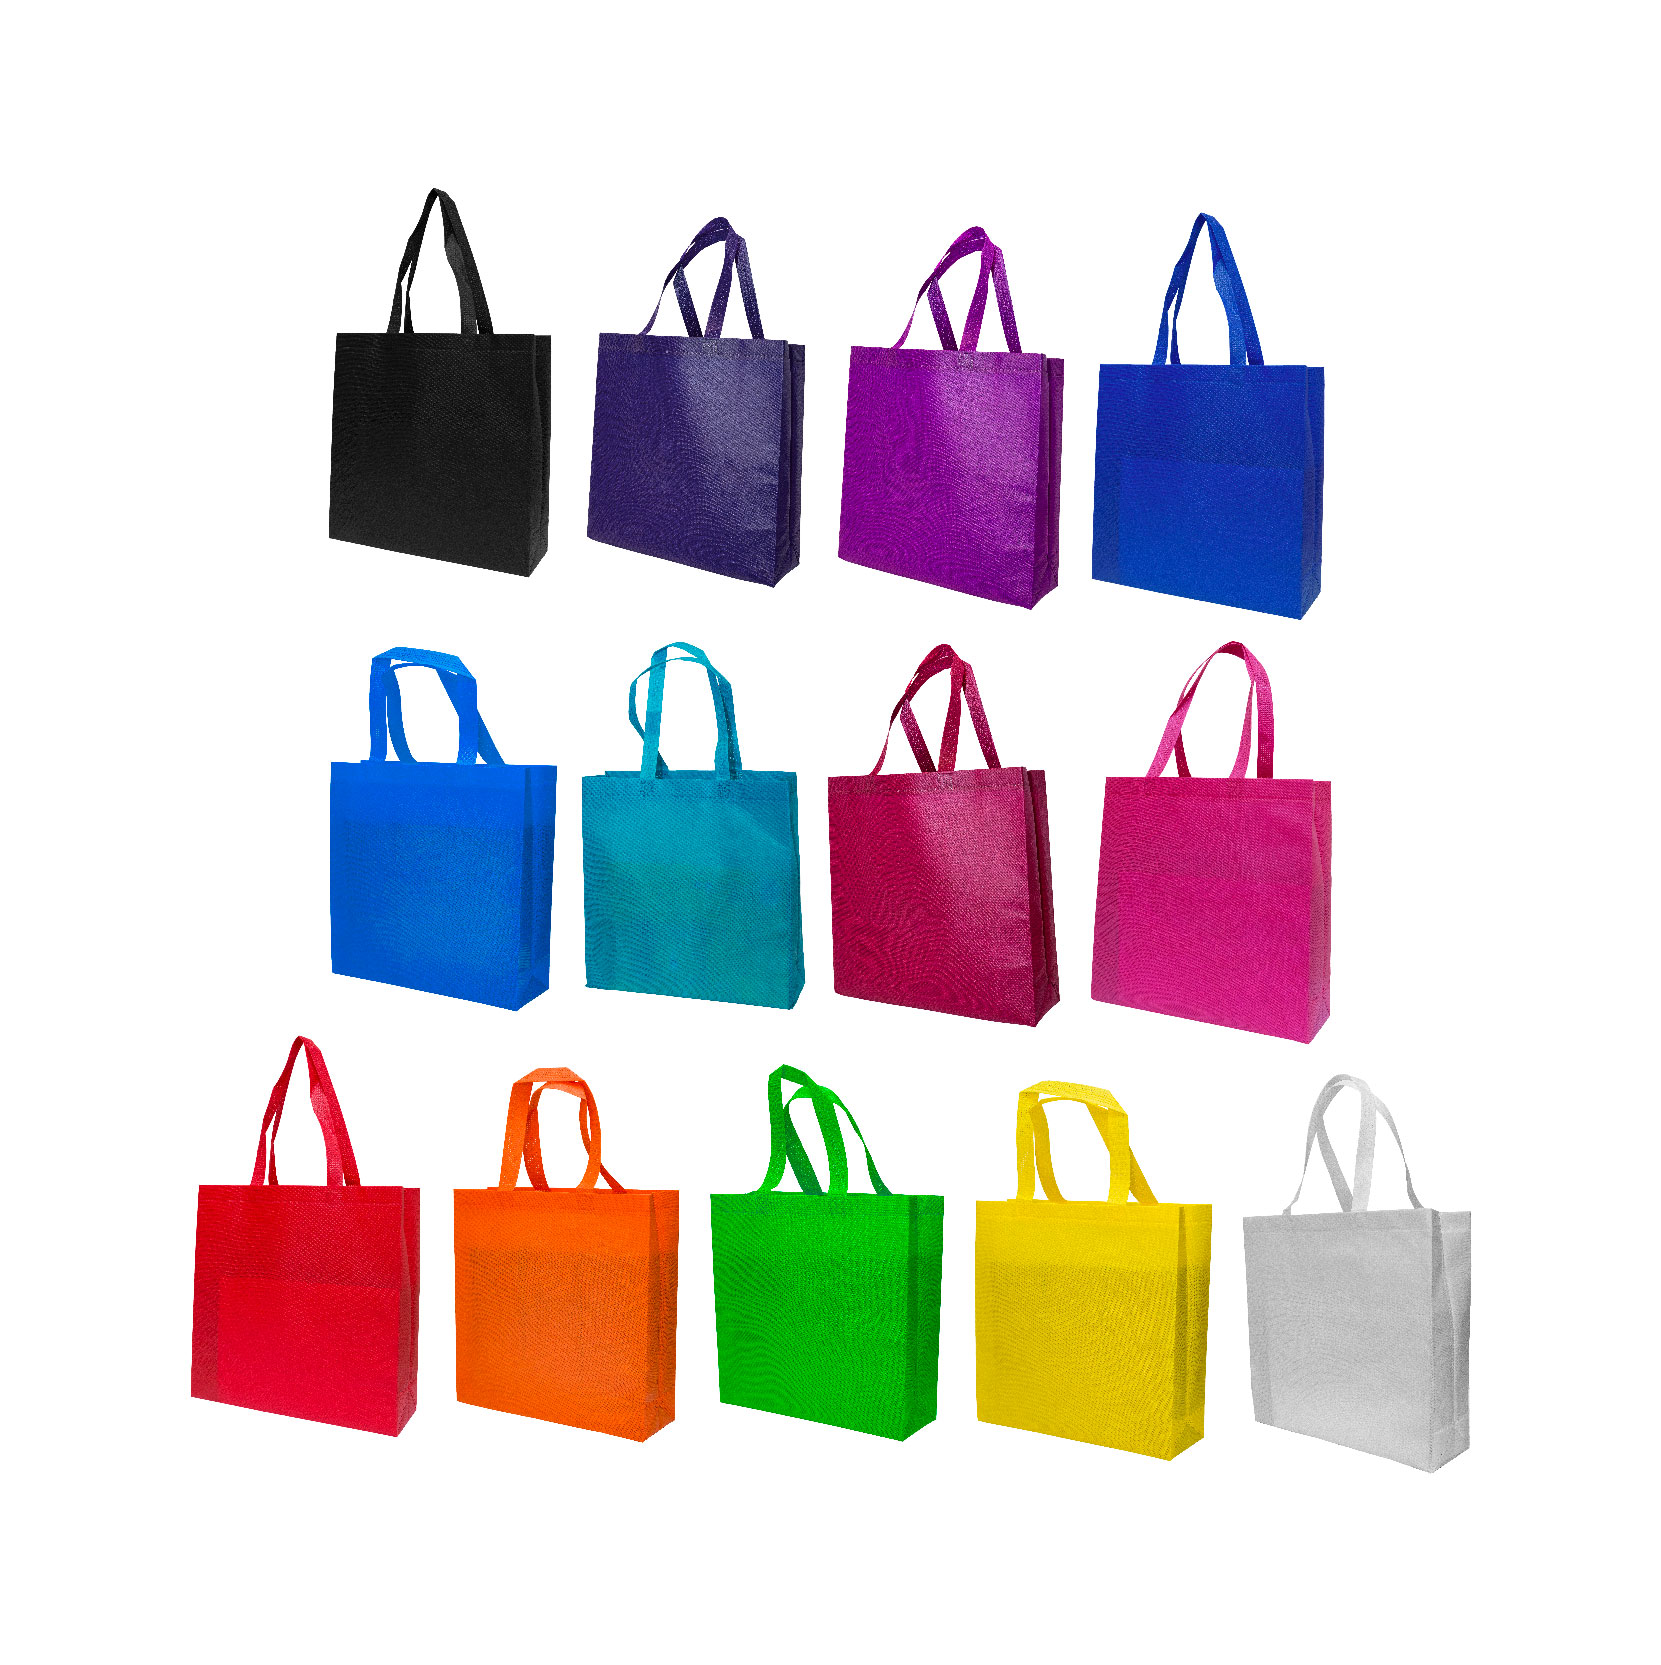 Customised Non Woven Bags Printing - Laminated Non Woven Bags